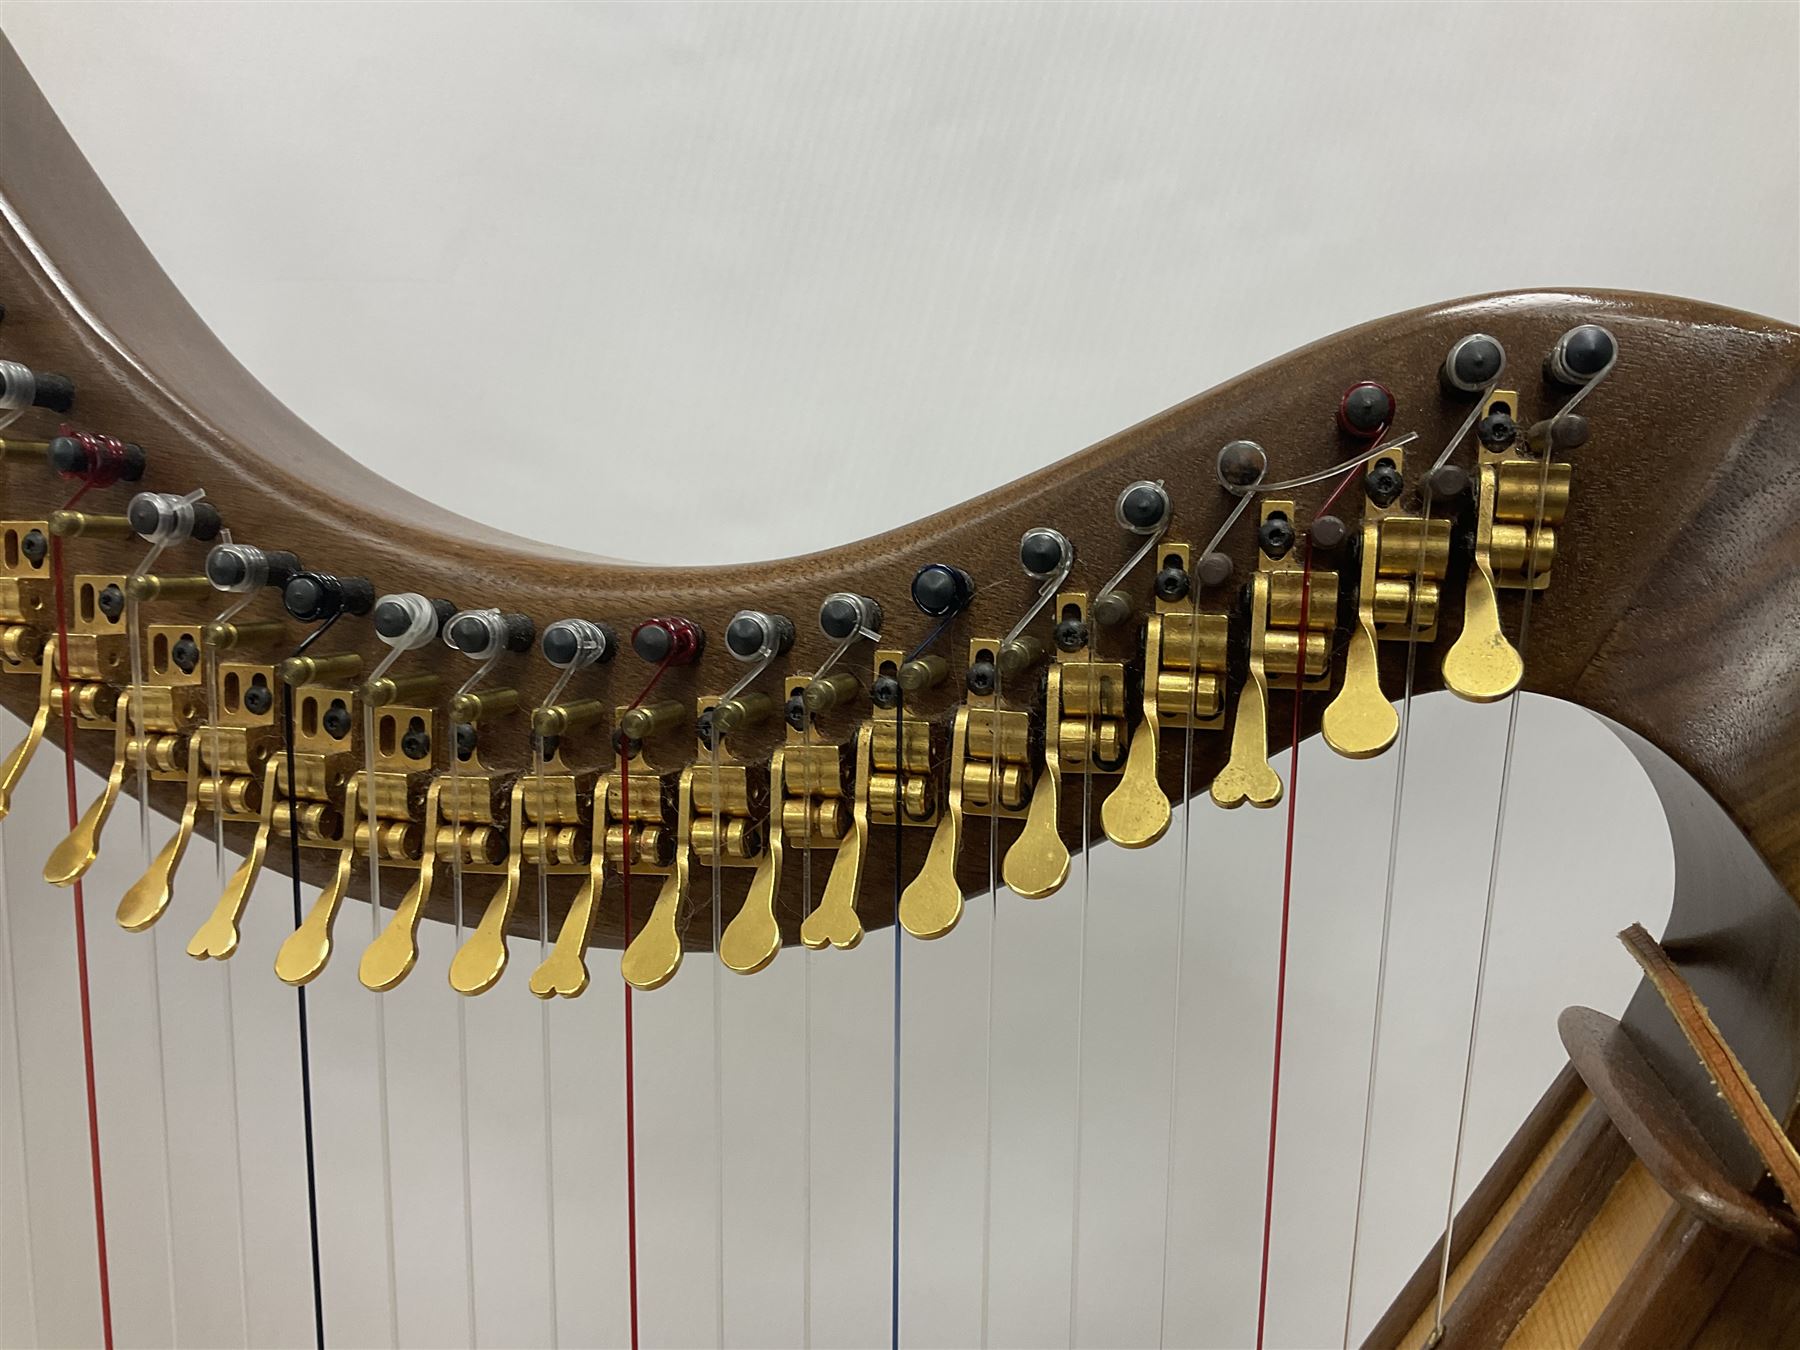 Contemporary 24 string Celtic or Irish Folk Harp with an Ash soundboard and 24 sharpening keys - Image 3 of 15